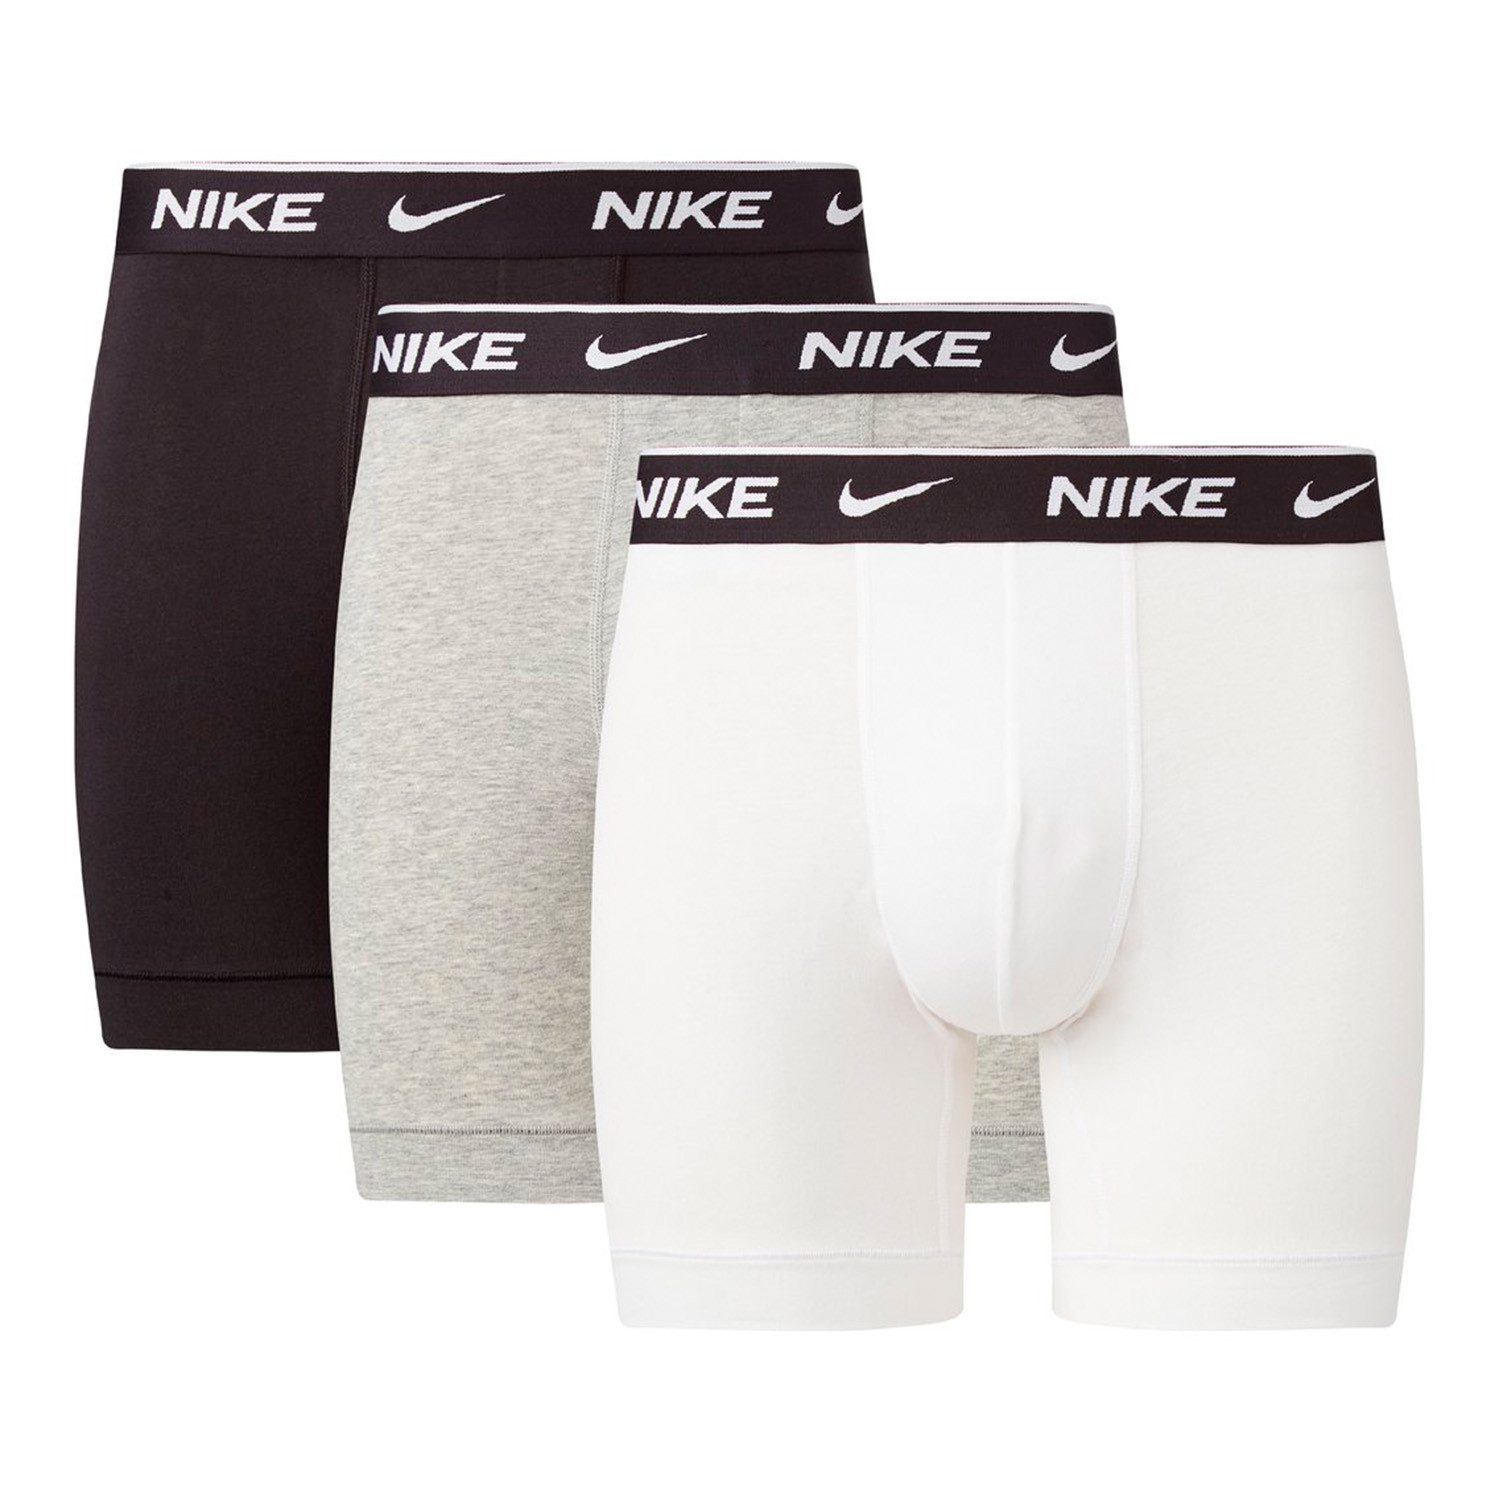 Nike Boxershorts Everyday Cotton Stretch Boxer Brief 3P